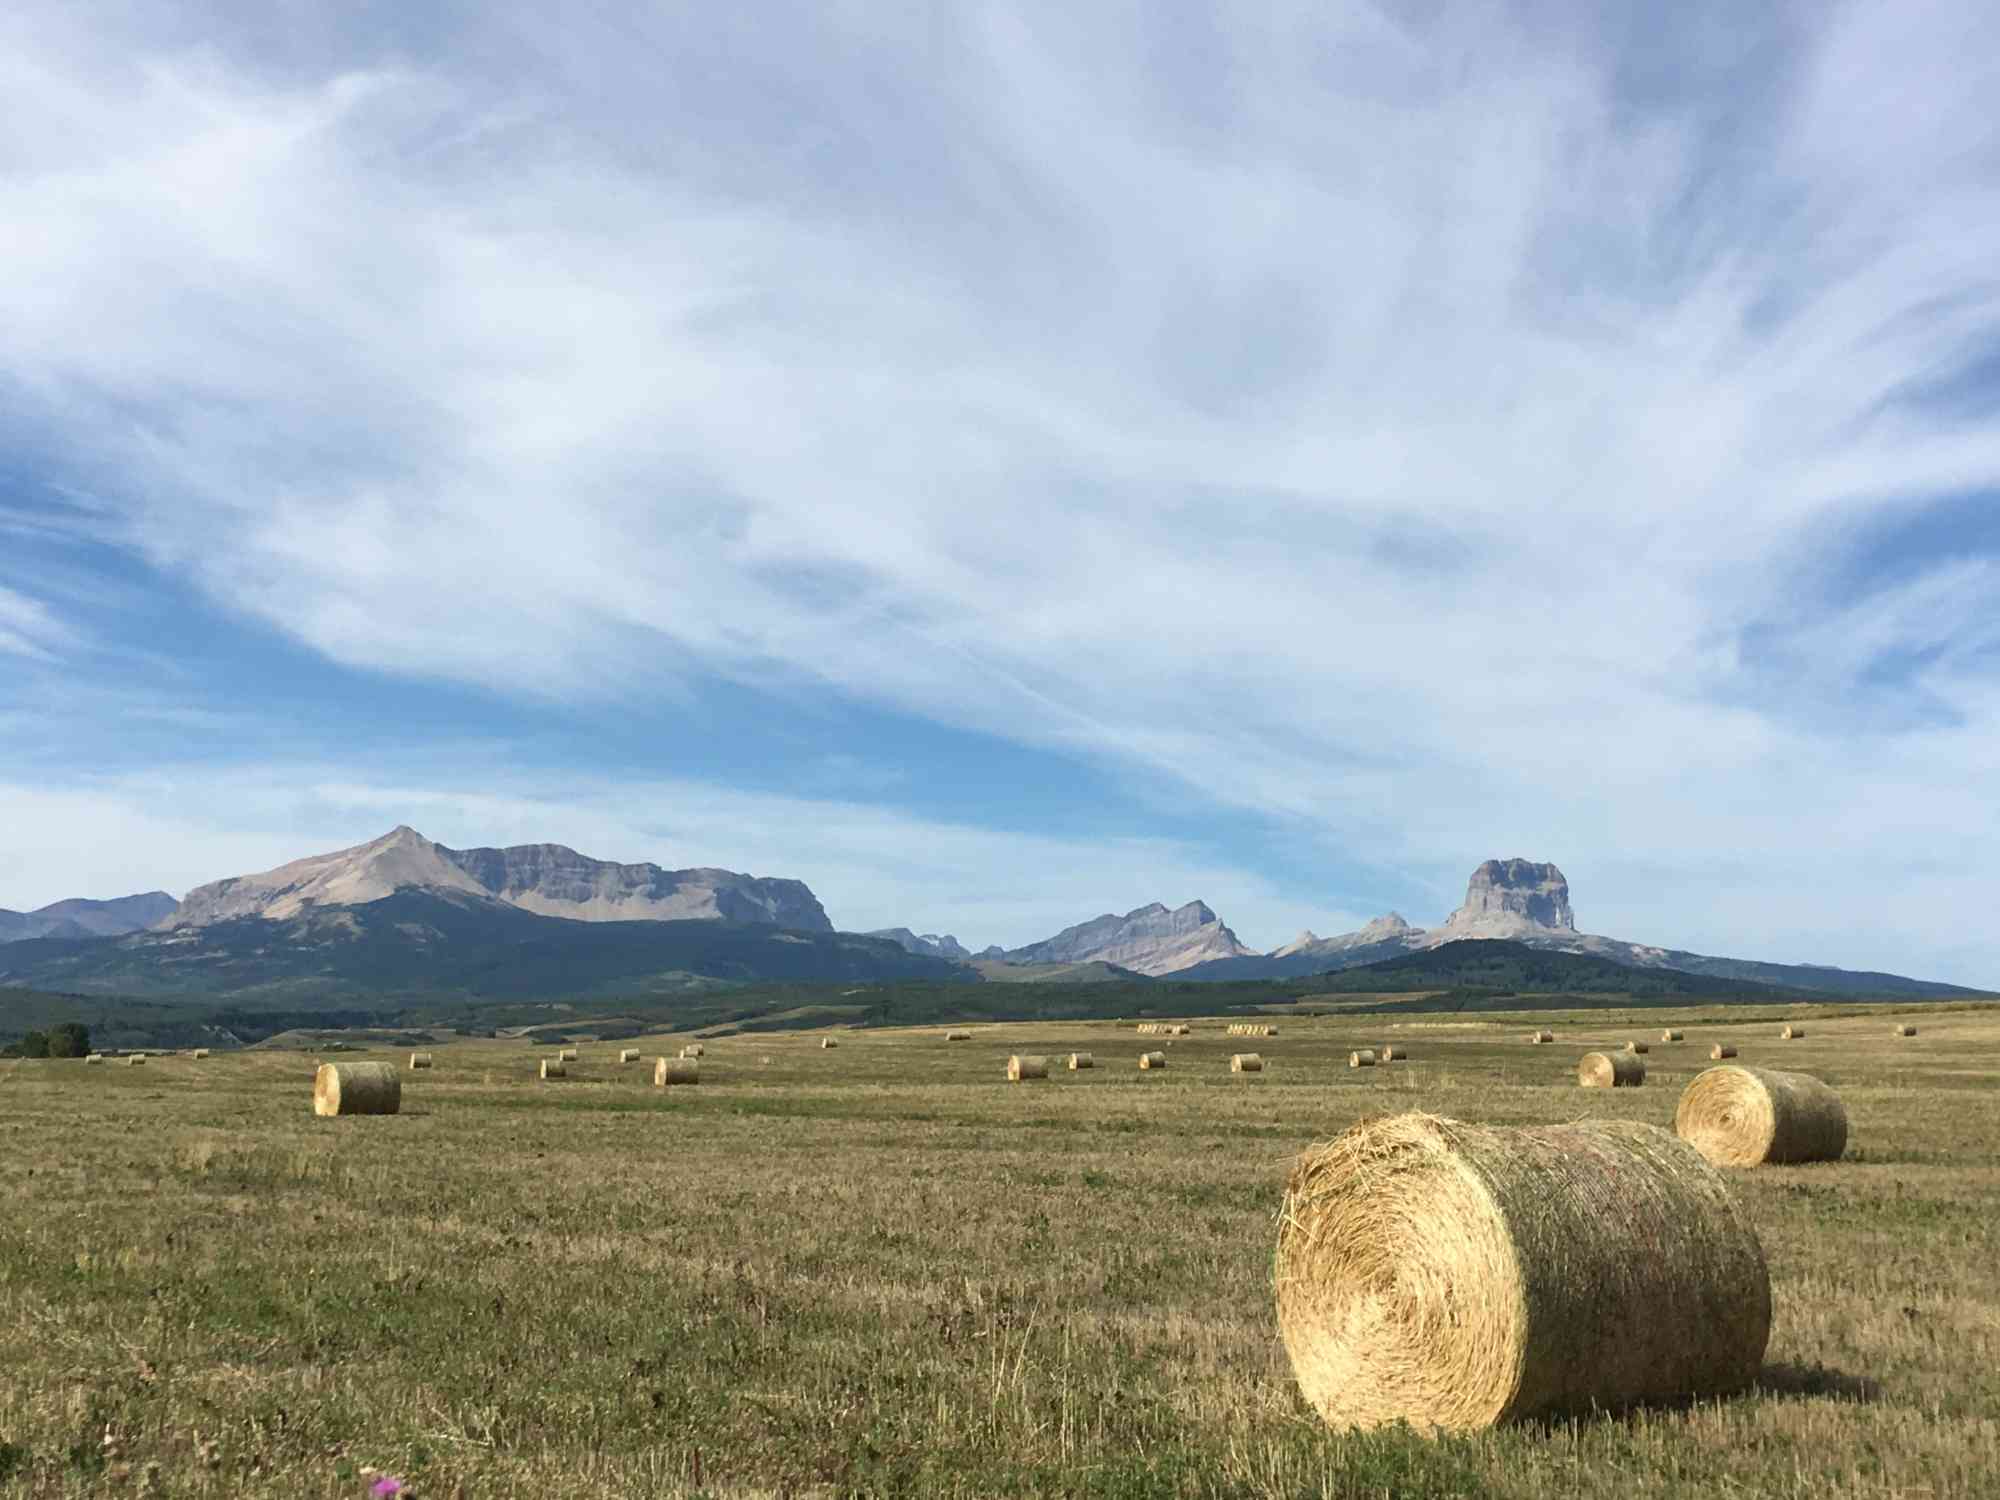 DITL - Electric Fencing - STILL - hay bails in foreground with mountains and sky in background